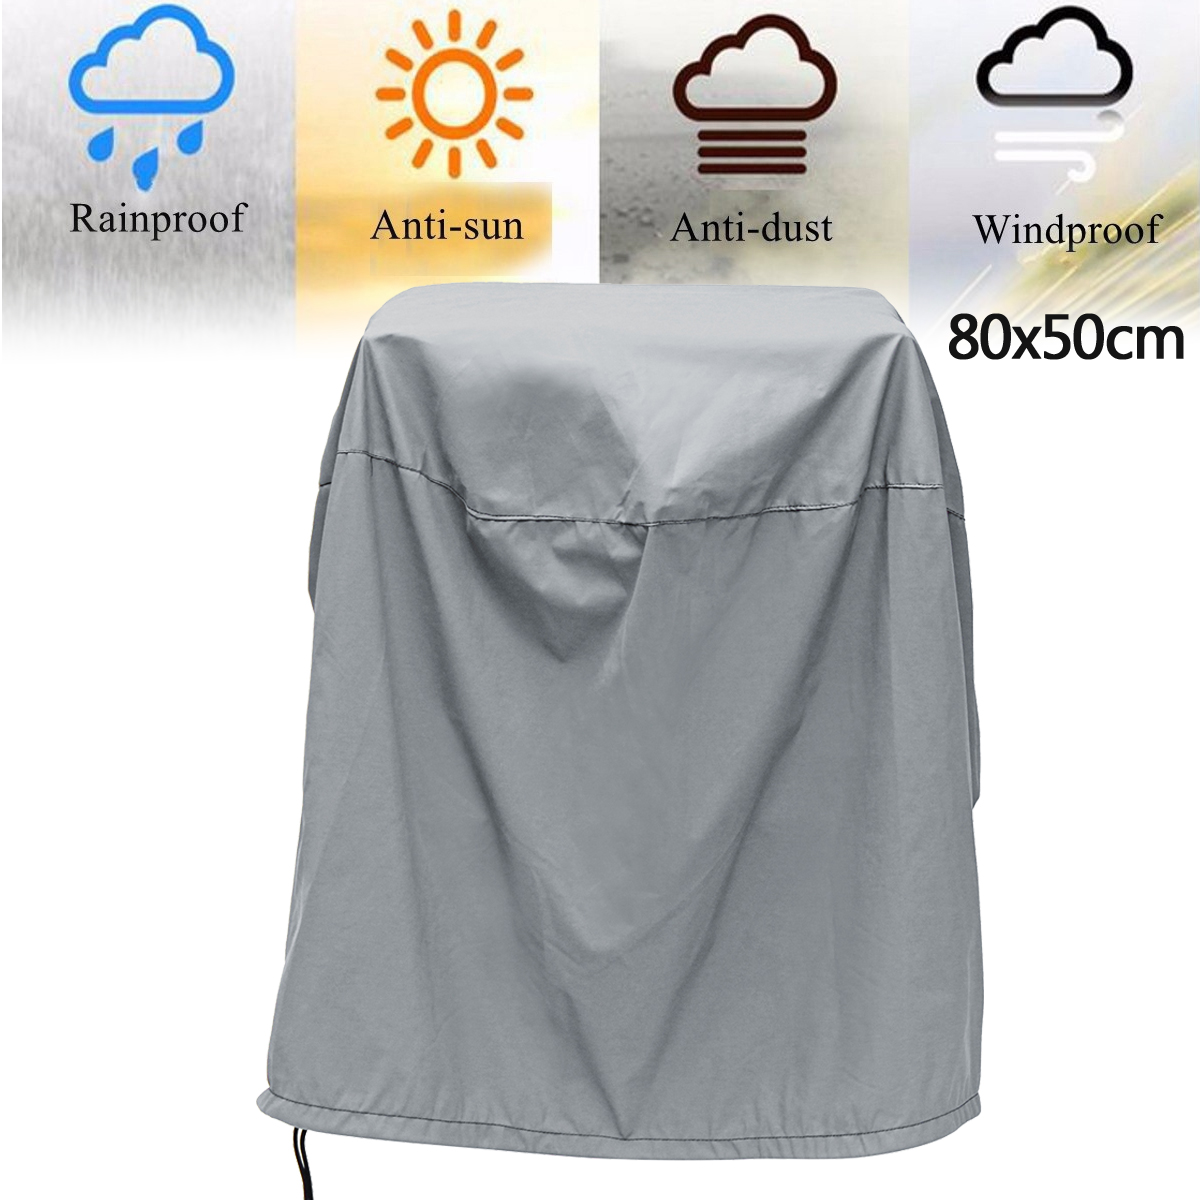 Outdoor-Grills-Cover-BBQ-Stove-Cover-Rain-UV-Proof-Canopy-Dust-Protector-For-Barbecue-Cooking-Stove-1311720-2